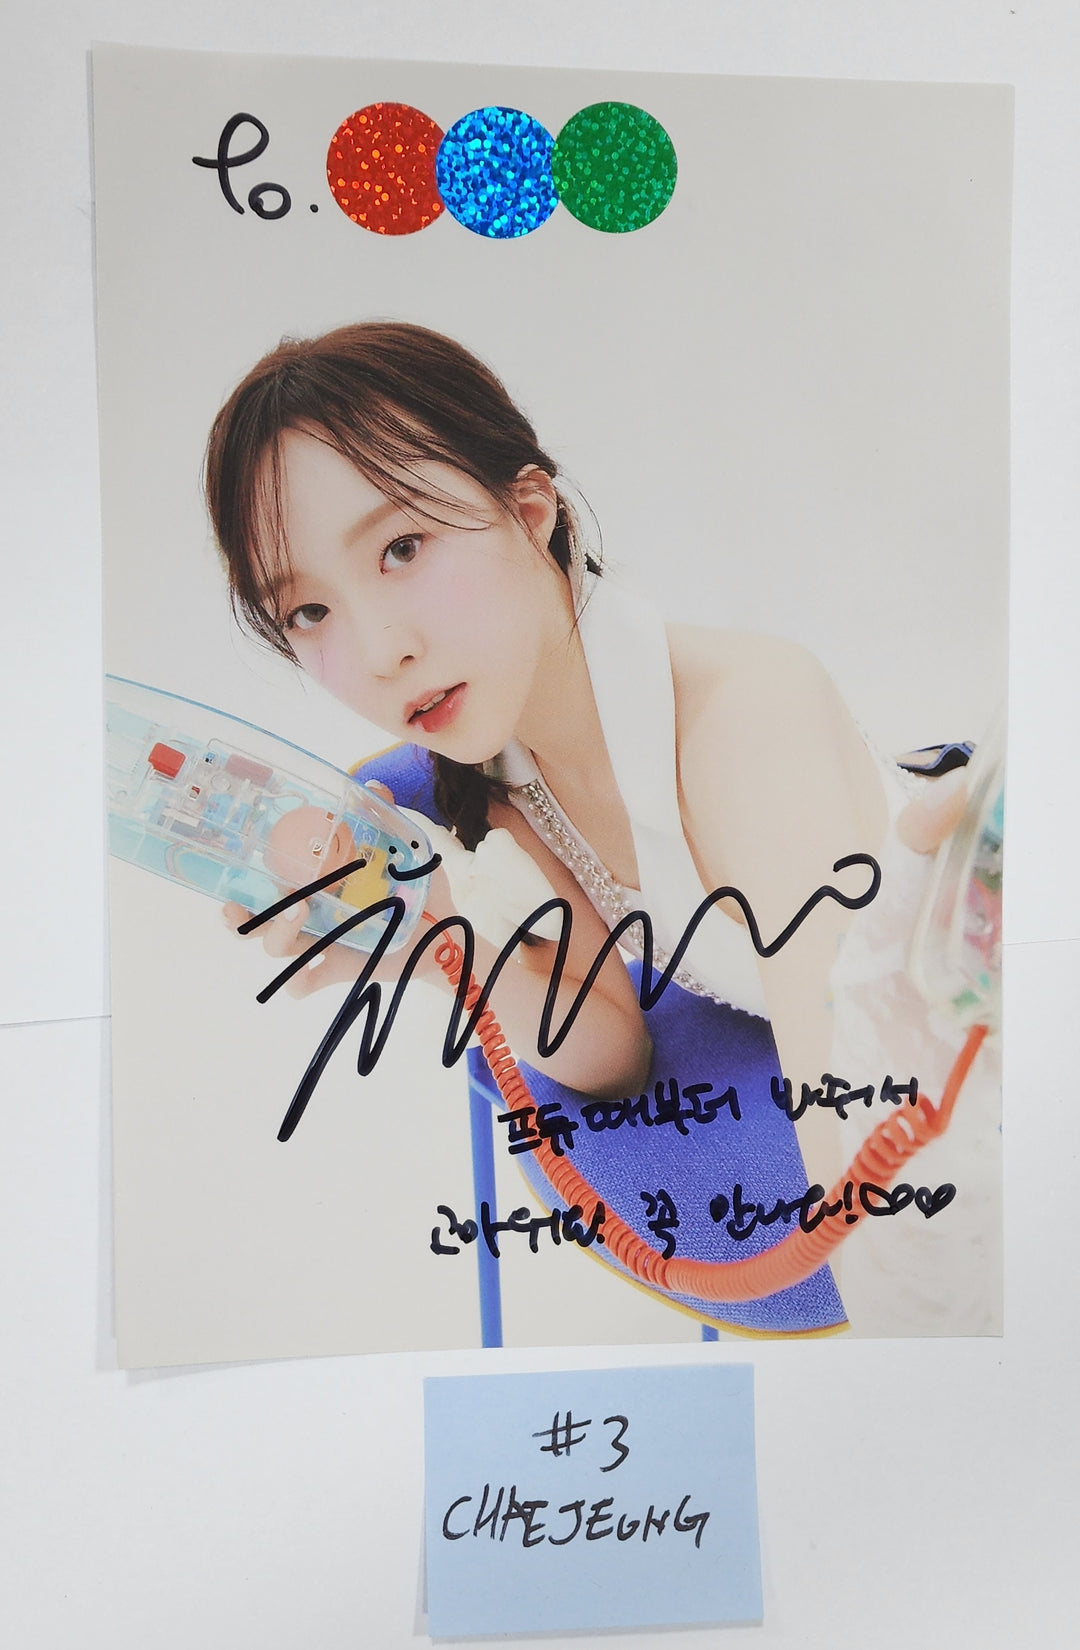 ALICE "DANCE ON" - A Cut Page From Fansign Event Album [12/15]